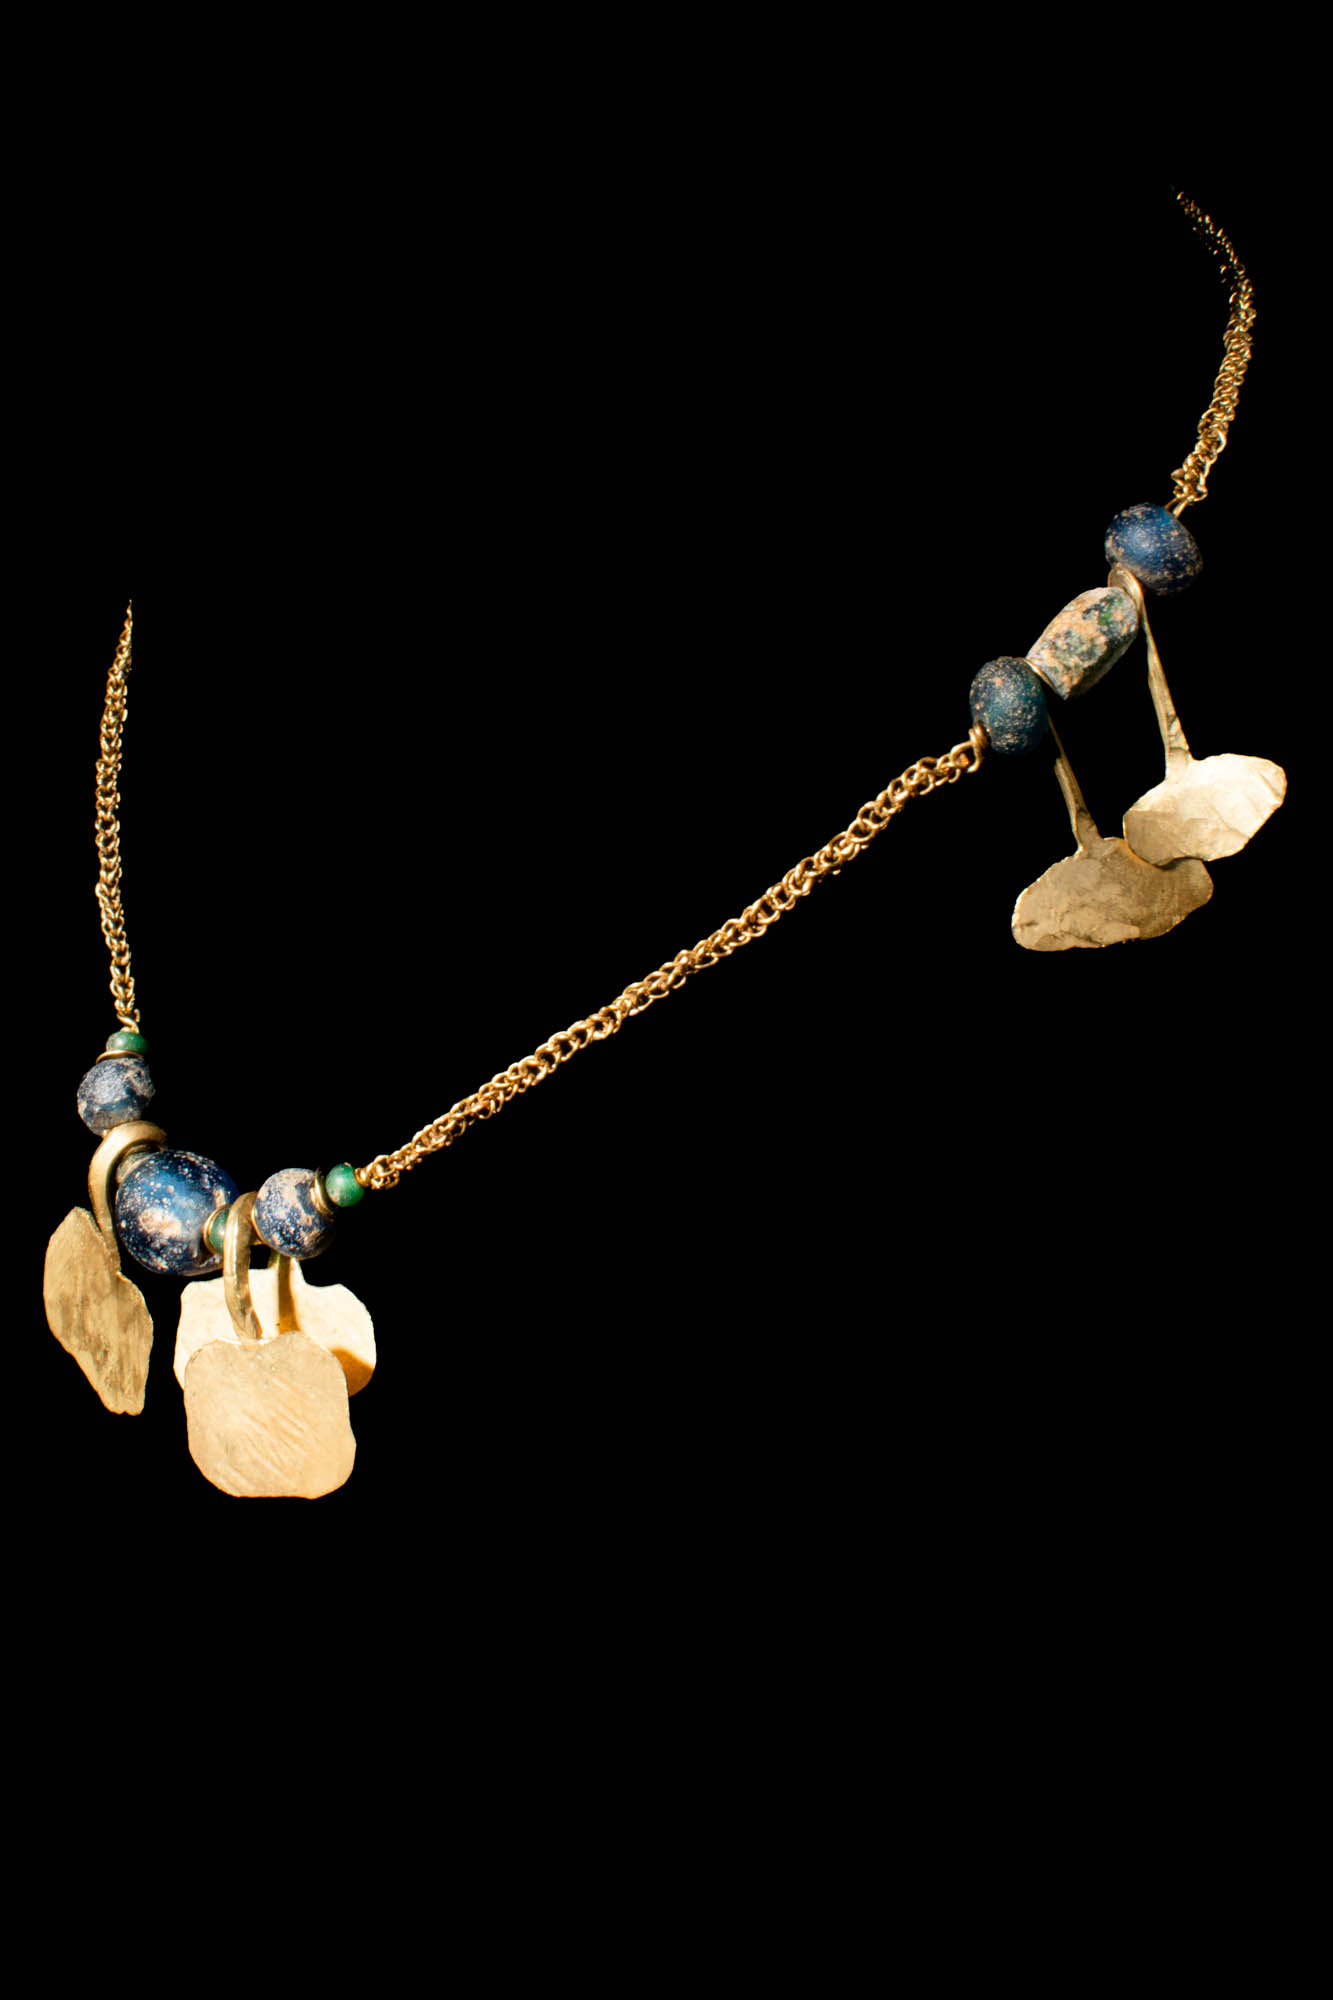 GOLD NECKLACE WITH EGYPTIAN GOLD PENDANTS AND BEADS - Image 5 of 8